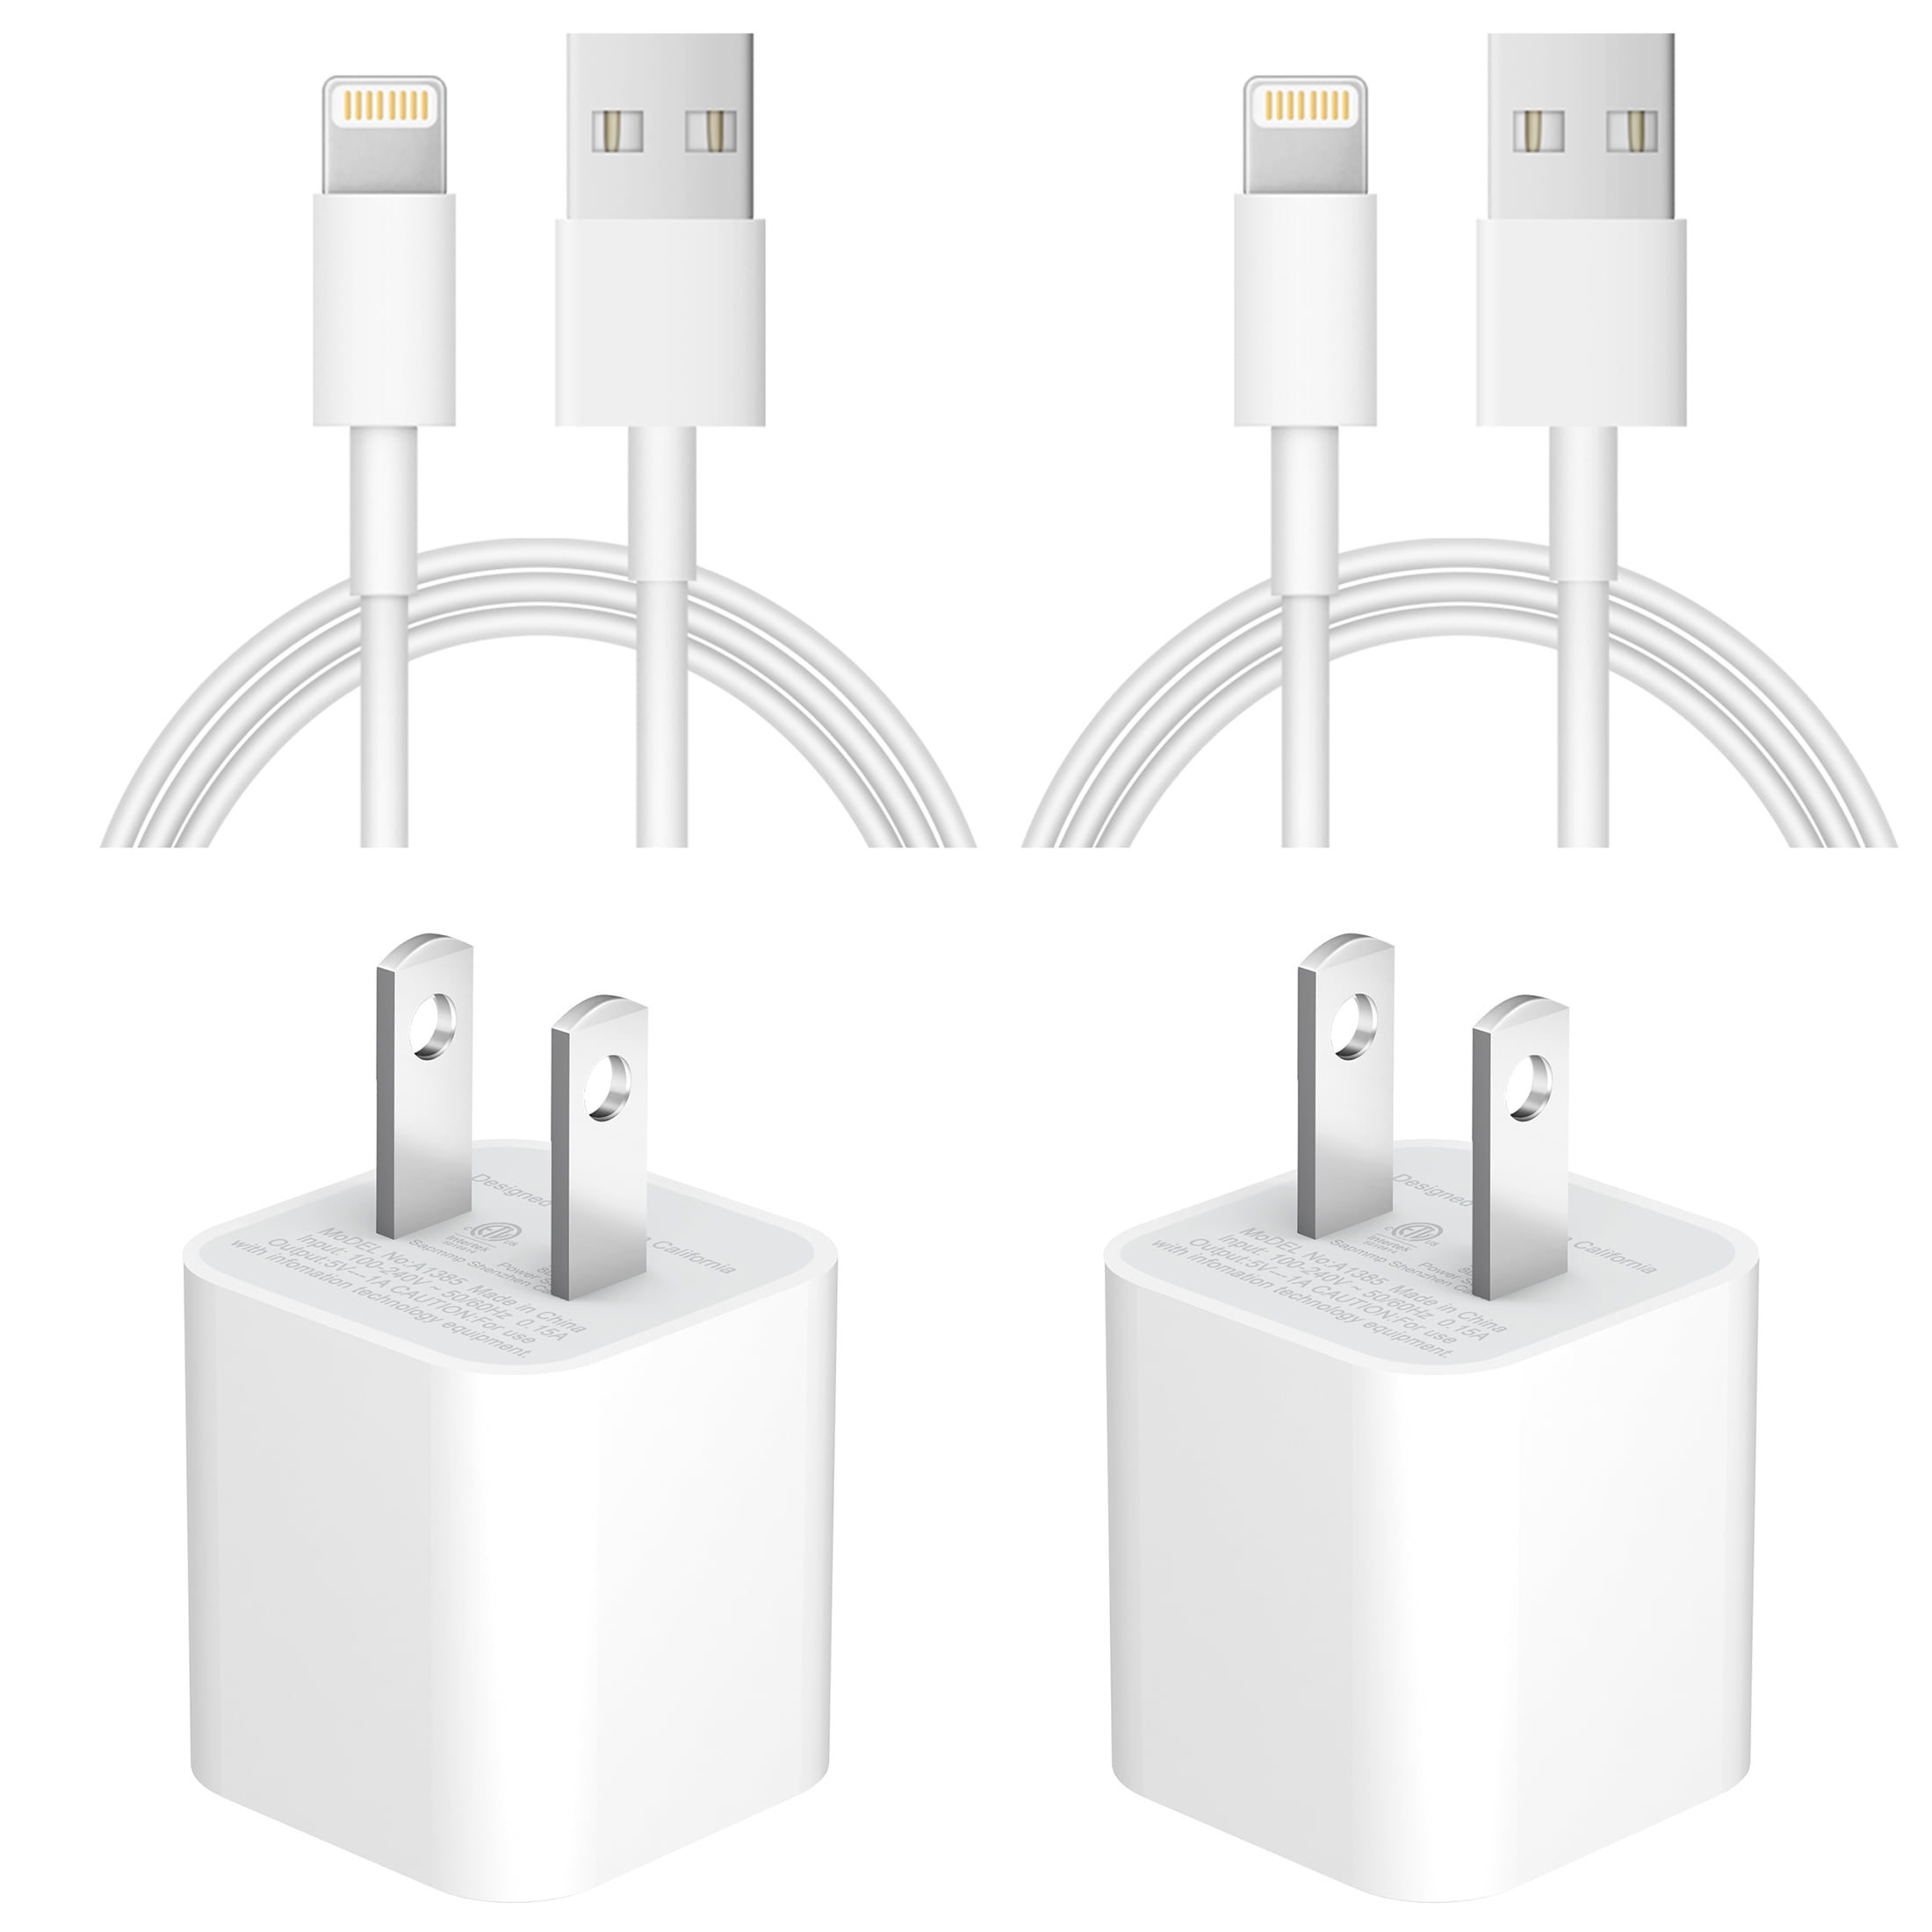 Cable Compatible Con iPhone 11 hasta 14 pro max - Retrievelcell